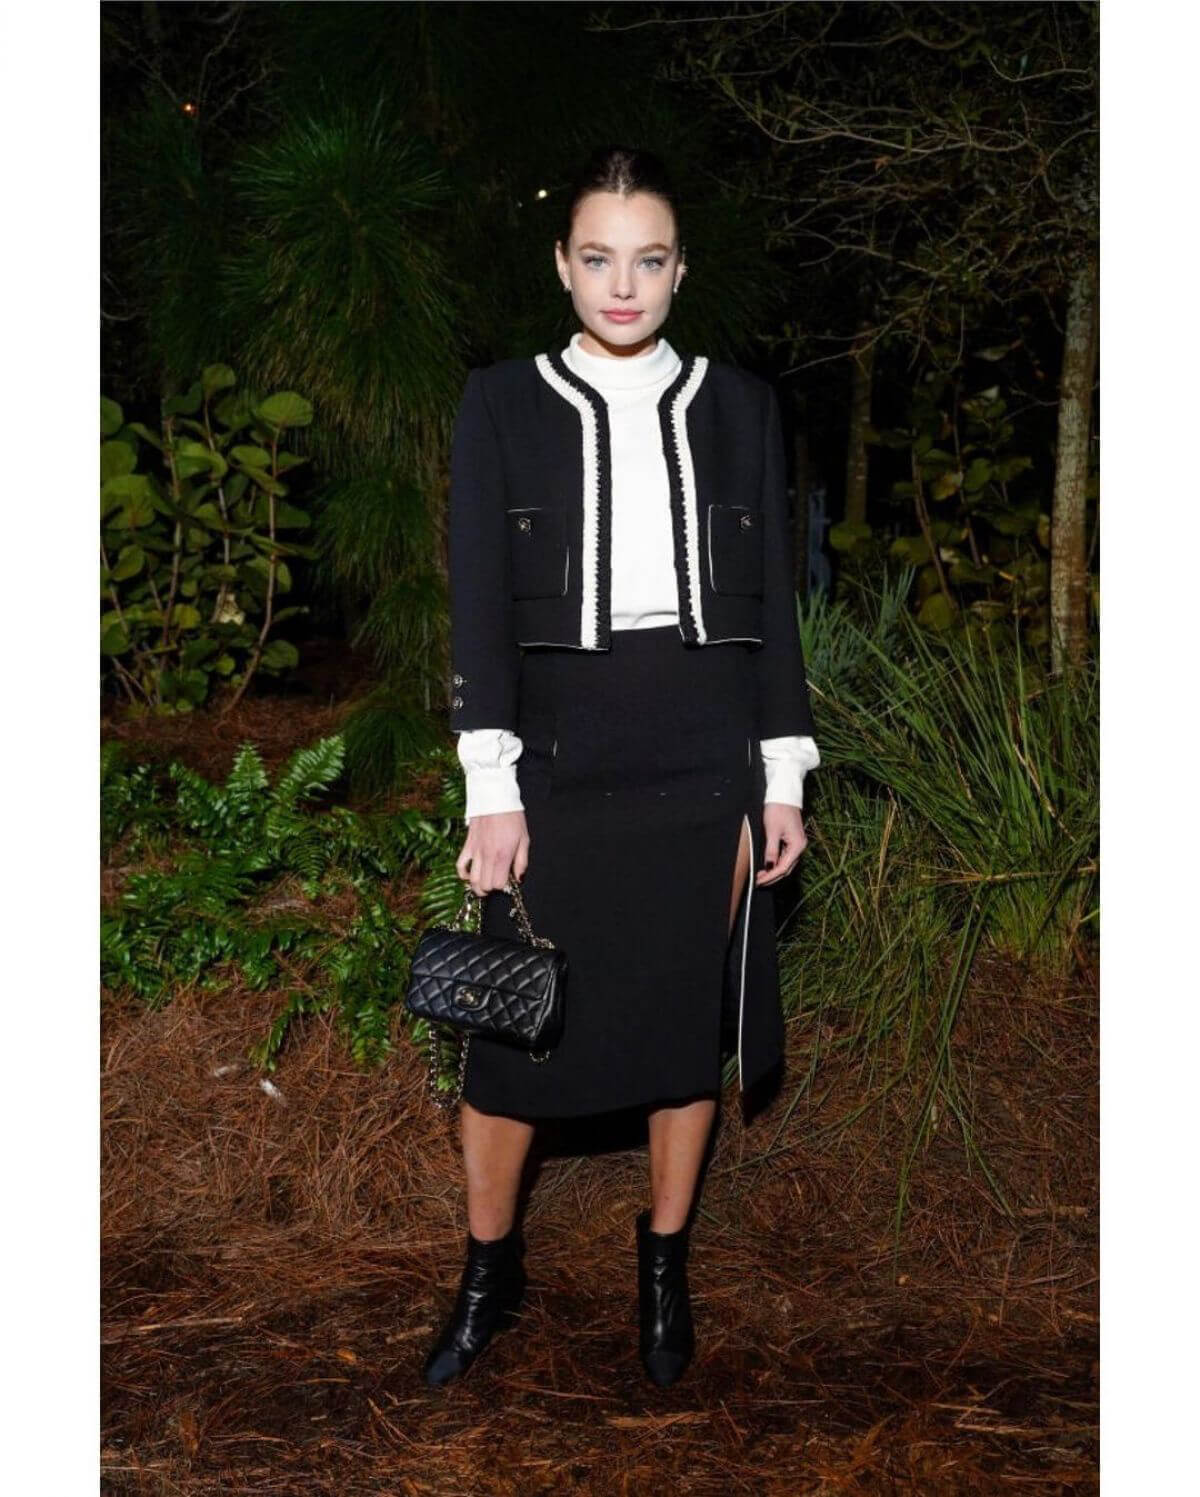 Kristine Froseth in Black and White Outfit at Chanel Dinner to Celebrate Five Echoes in Miami 3